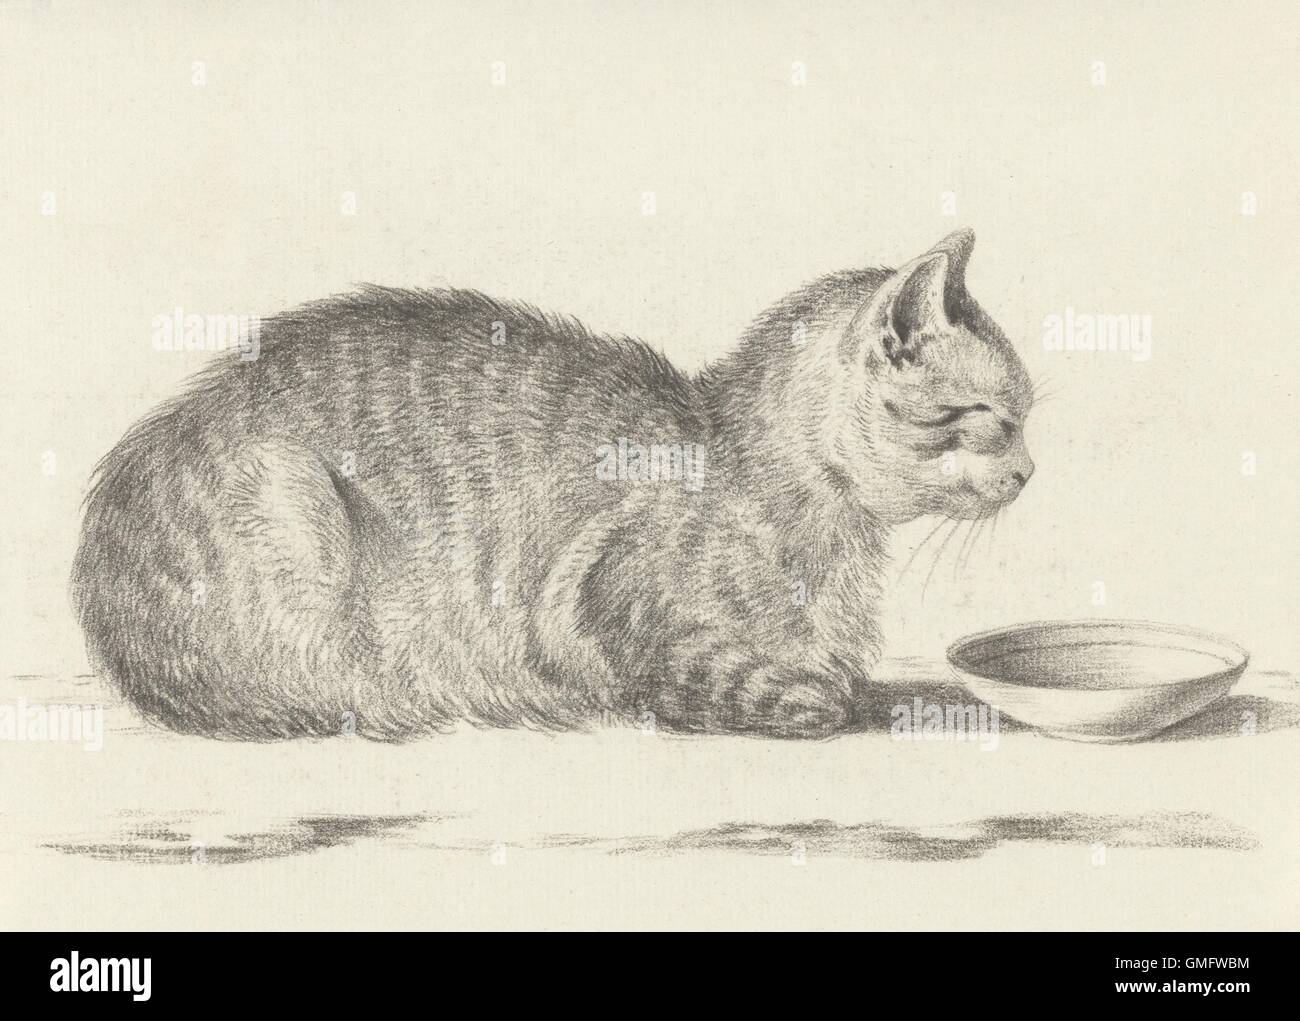 Lying Cat, Facing Right, by a Dish, by Jean Bernard, 1812, Dutch chalk drawing. (BSLOC 2016 1 271) Stock Photo